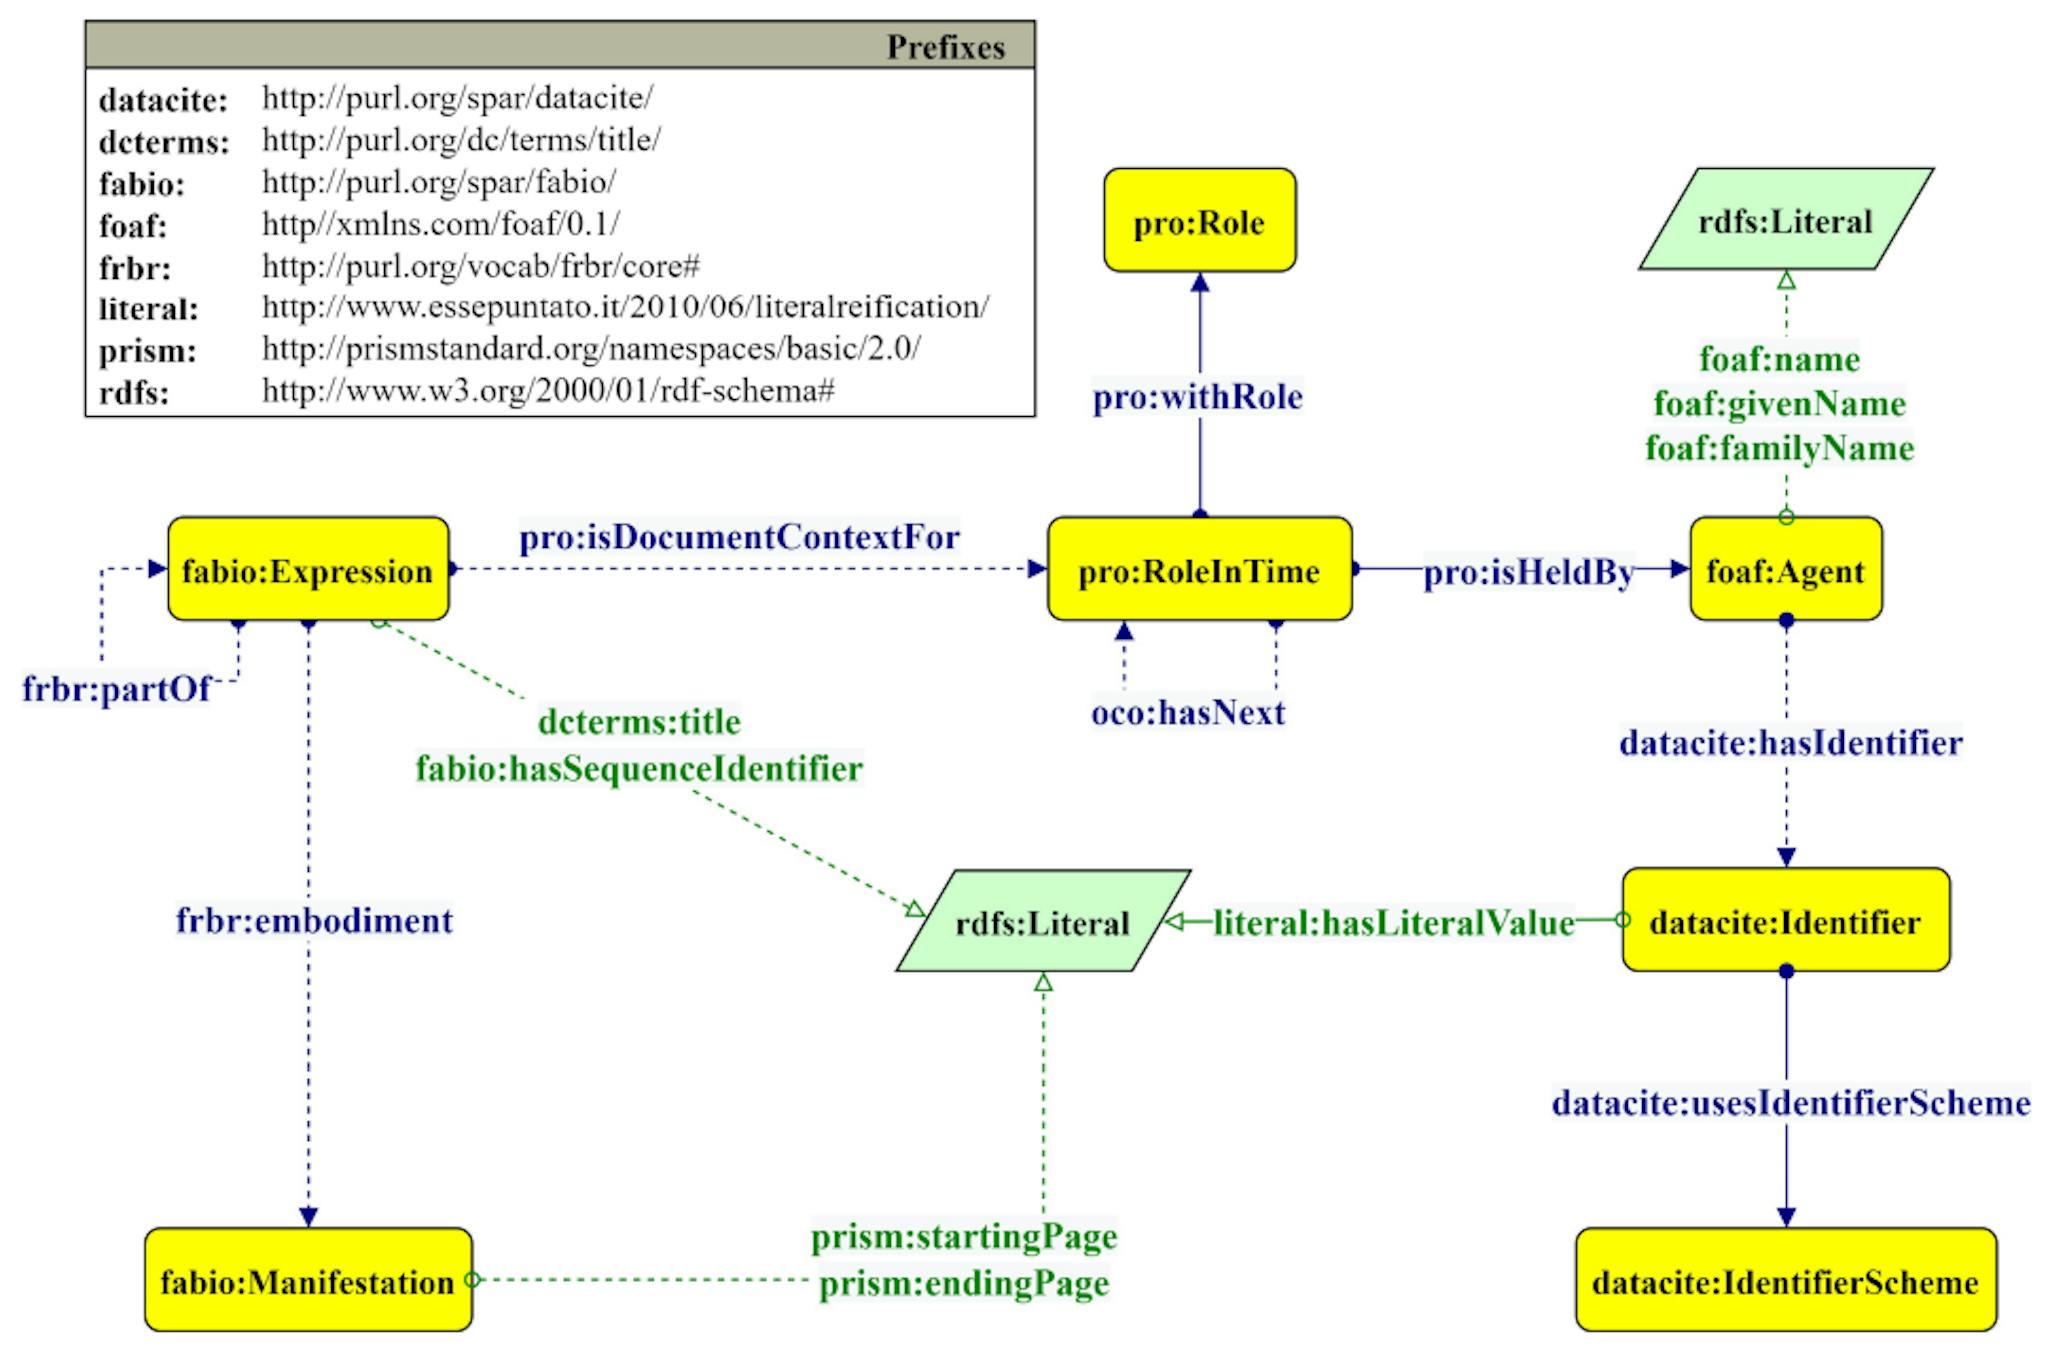 Figure 5: Part of the OCDM used in OpenCitations Meta. Yellow rectangles represent classes, green polygons represent datatypes, and blue and green arrows represent object properties and data properties, respectively